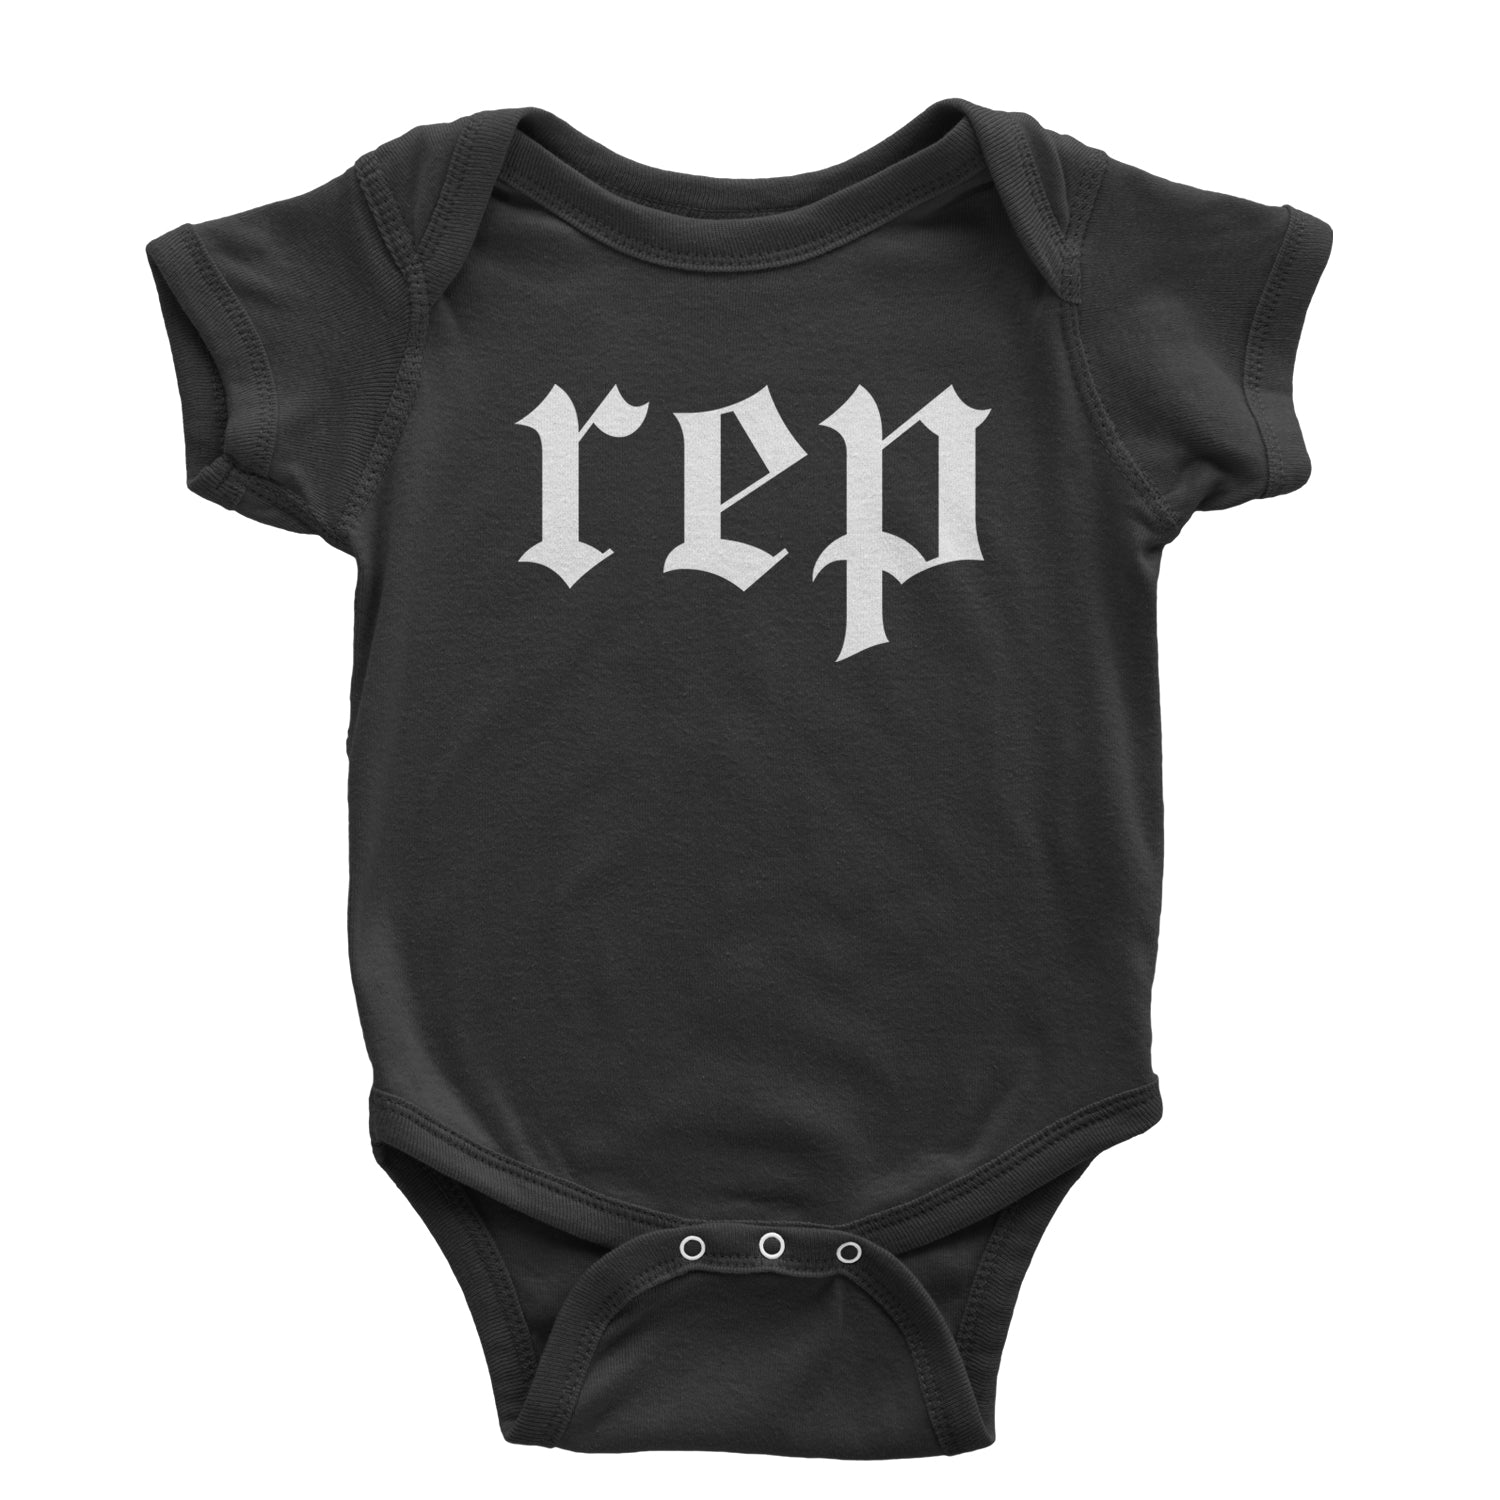 REP Reputation Music Lover Gift Fan Favorite Infant One-Piece Romper Bodysuit and Toddler T-shirt